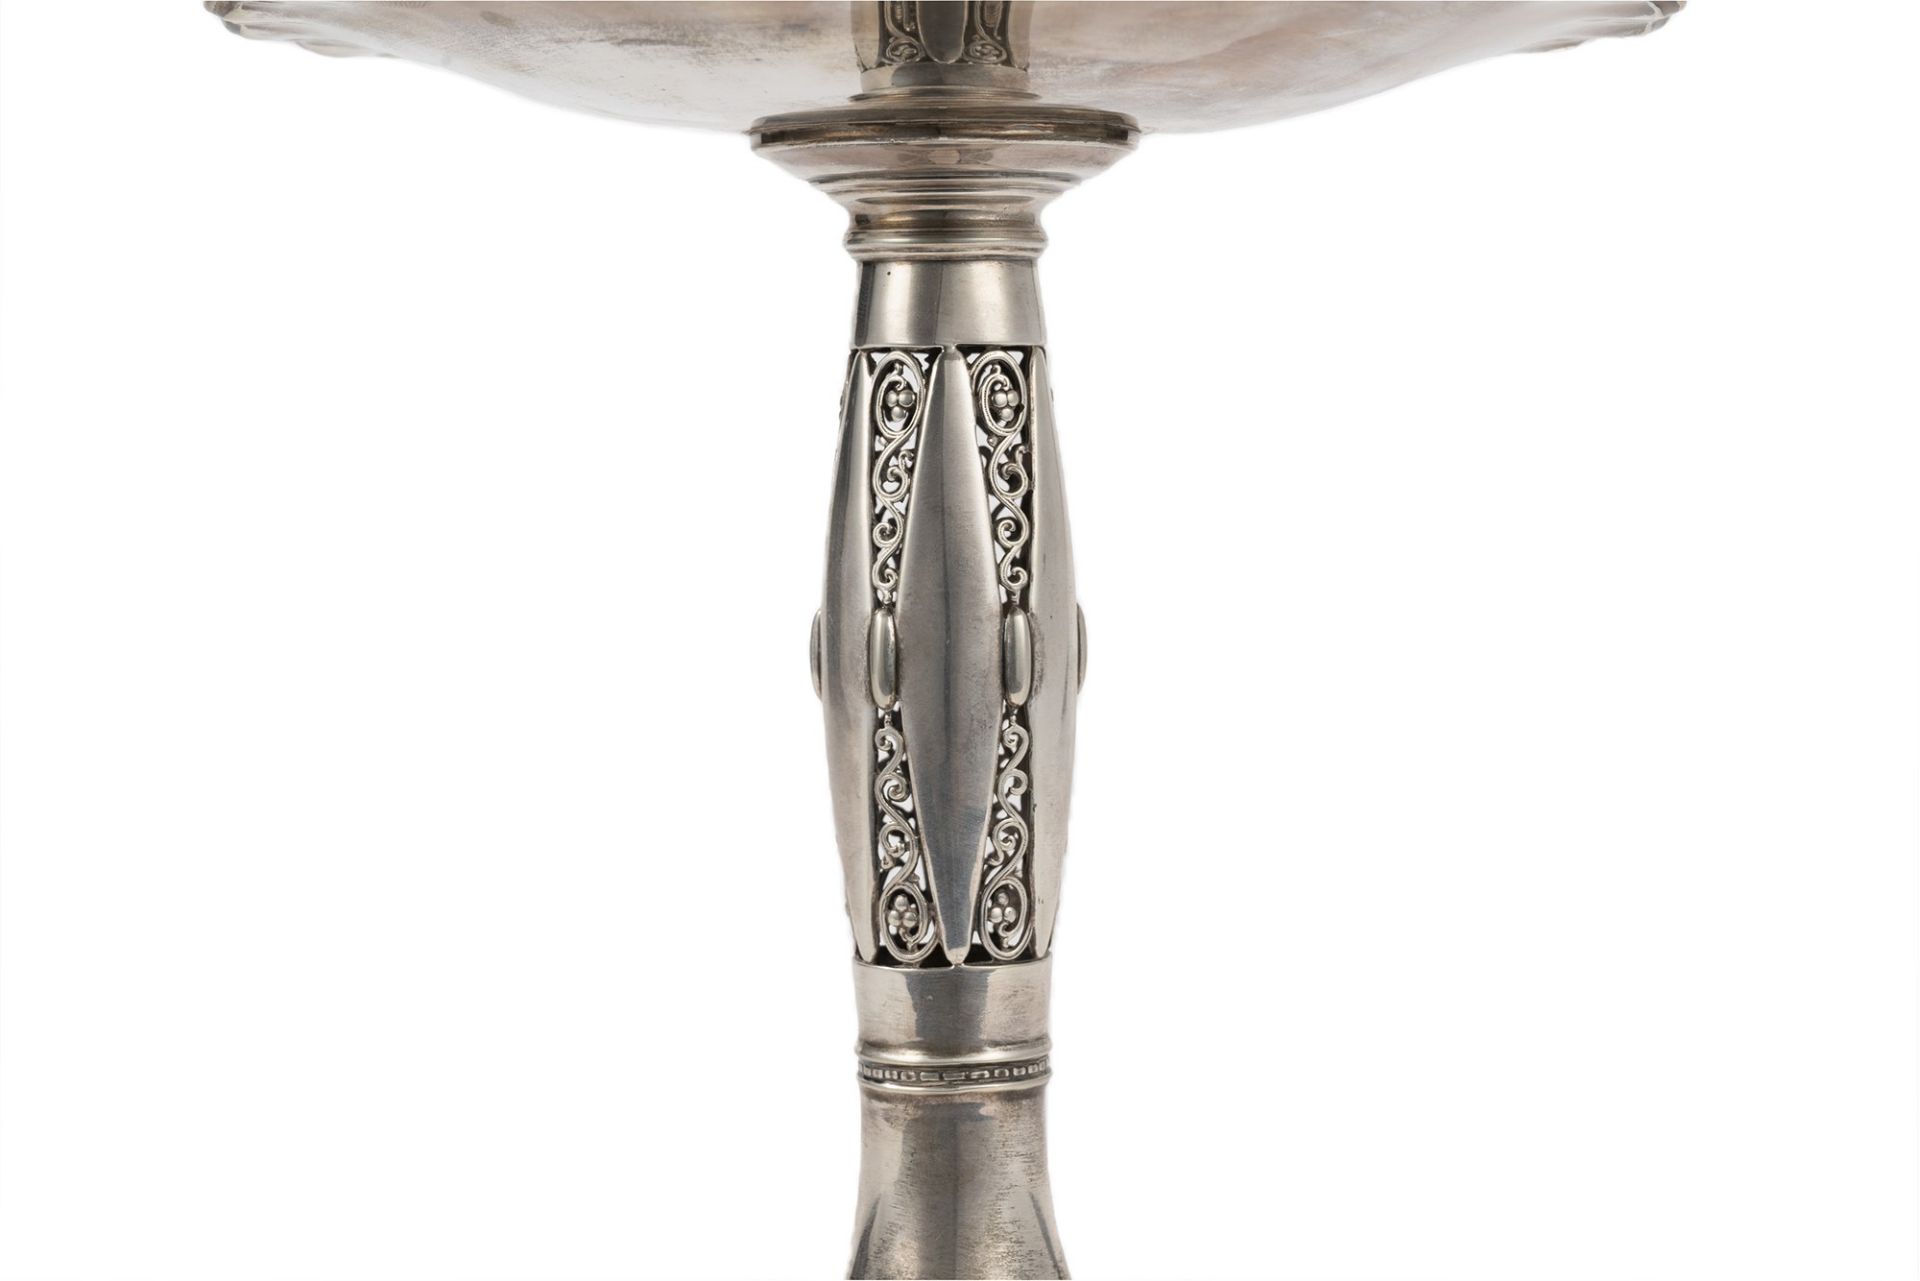 Embossed, pierced and chiseled silver stand, Germany, early 20th century - Bild 3 aus 4